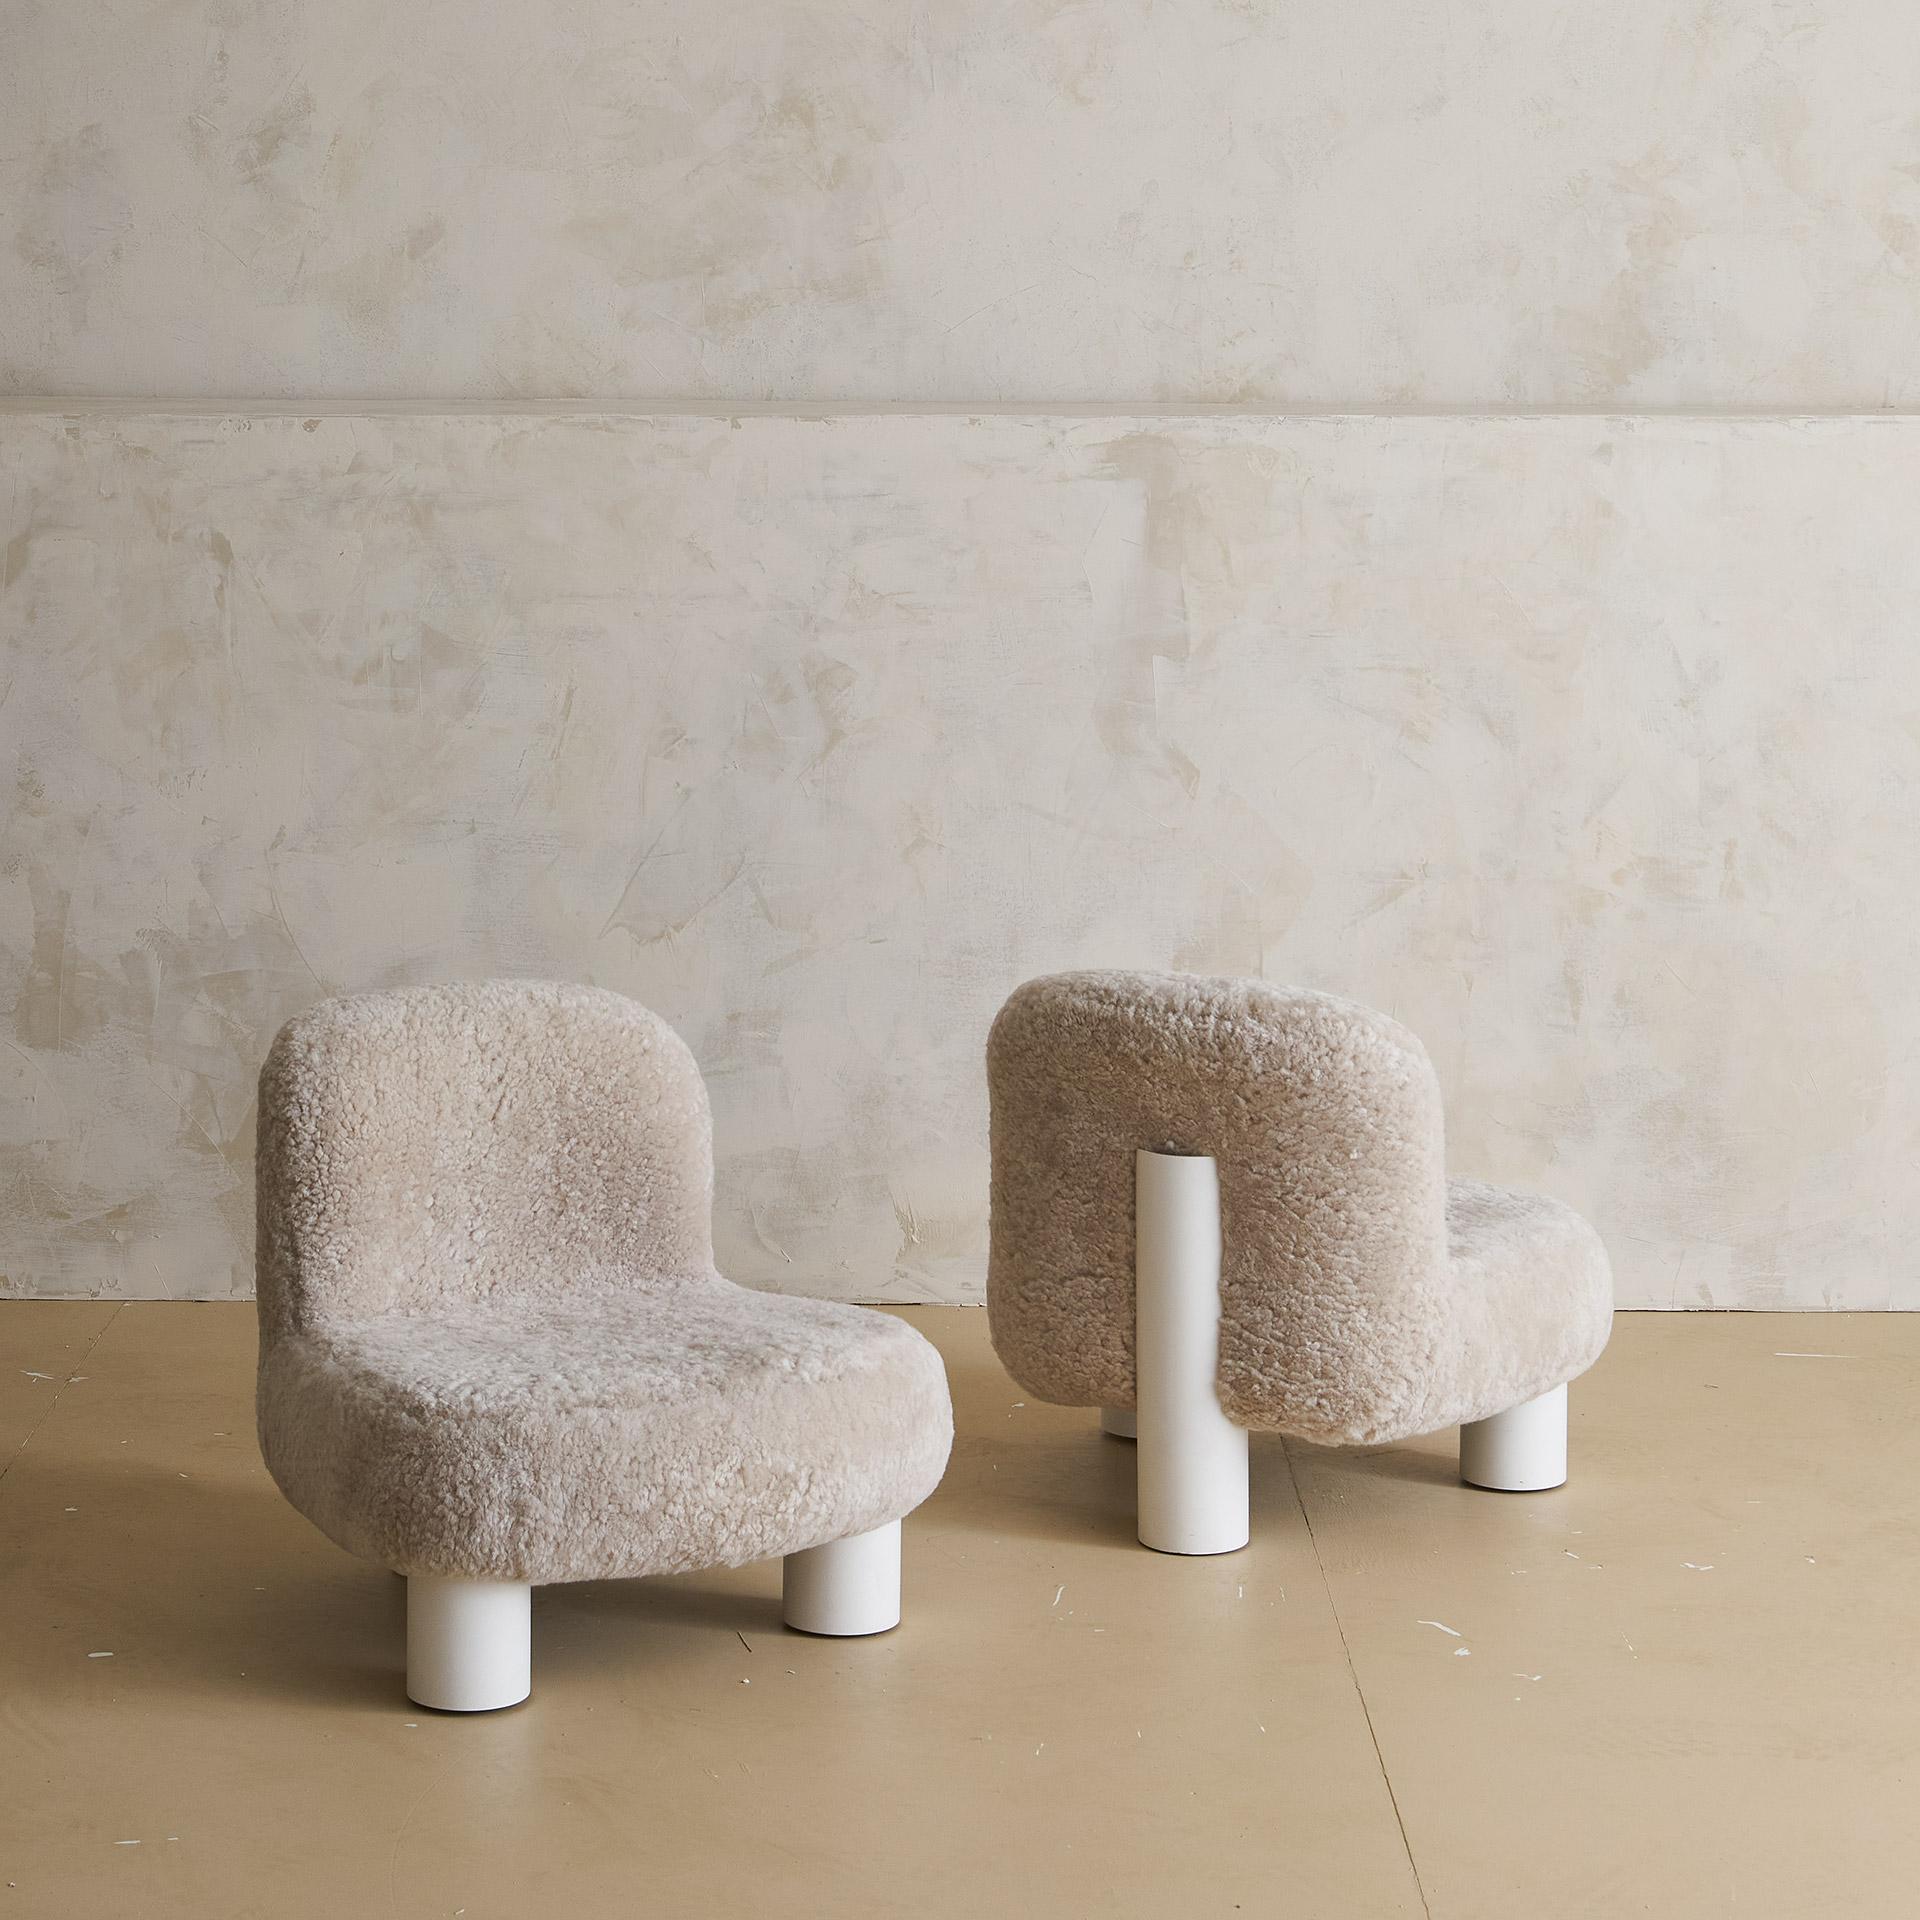 Designed by Cini Boeri in 1973, this chair provided a unique versatility to customers thanks to the variety of heights it was sold in and the wheels hidden in the legs, allowing the chair to roll. This chair is the low version of the Botolo Chair